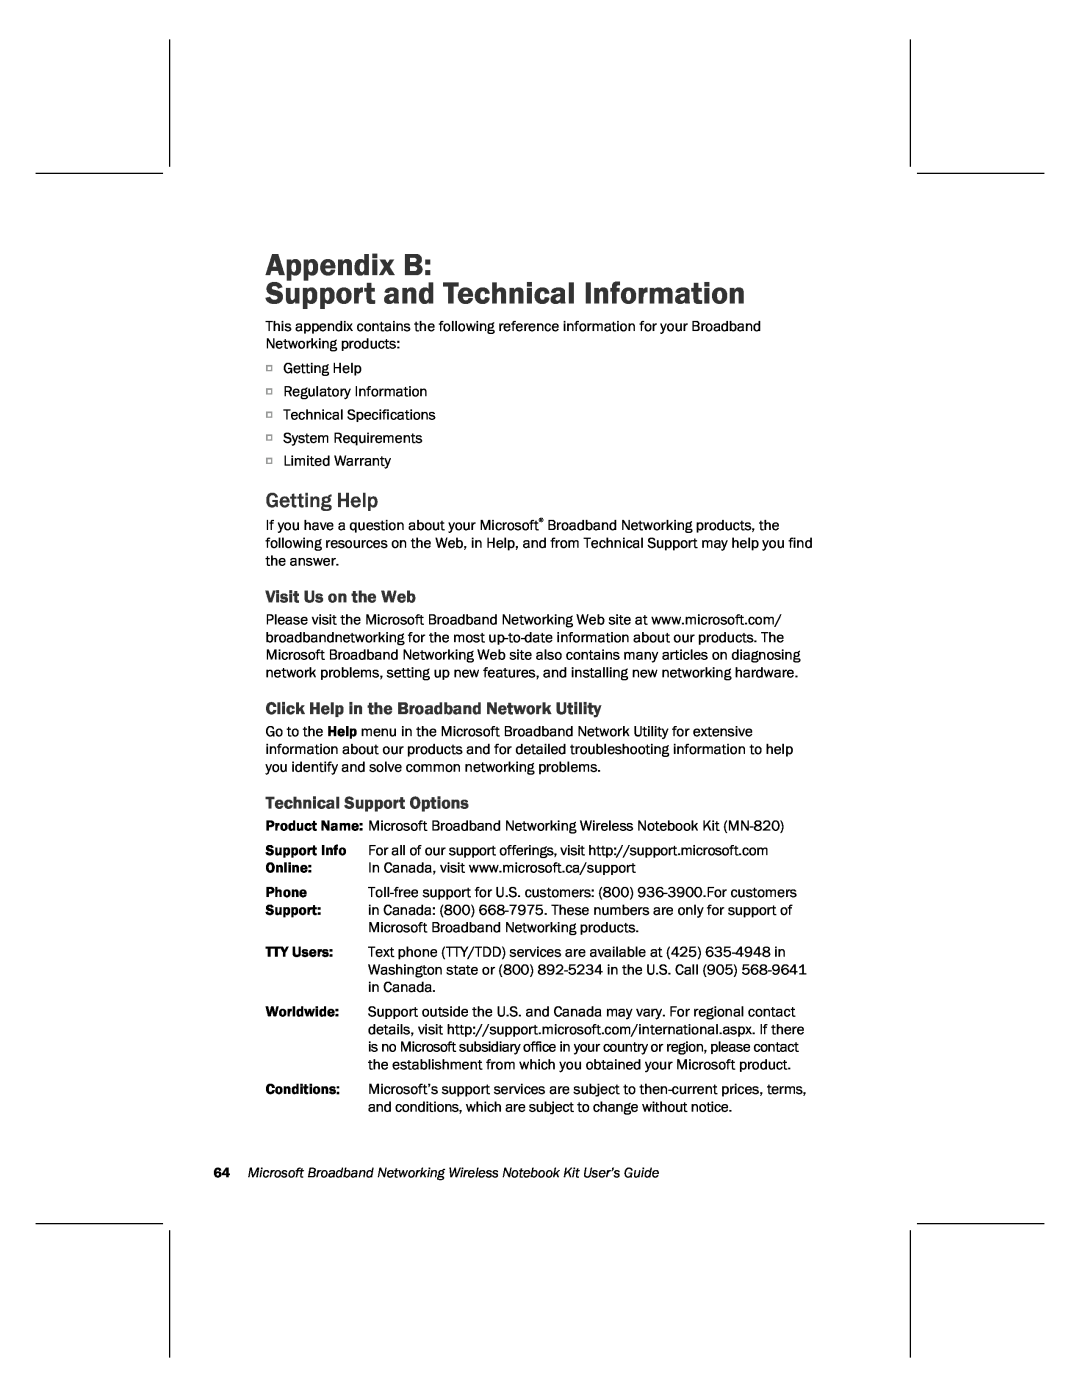 Microsoft MN-820 manual Appendix B Support and Technical Information, Getting Help, Visit Us on the Web 